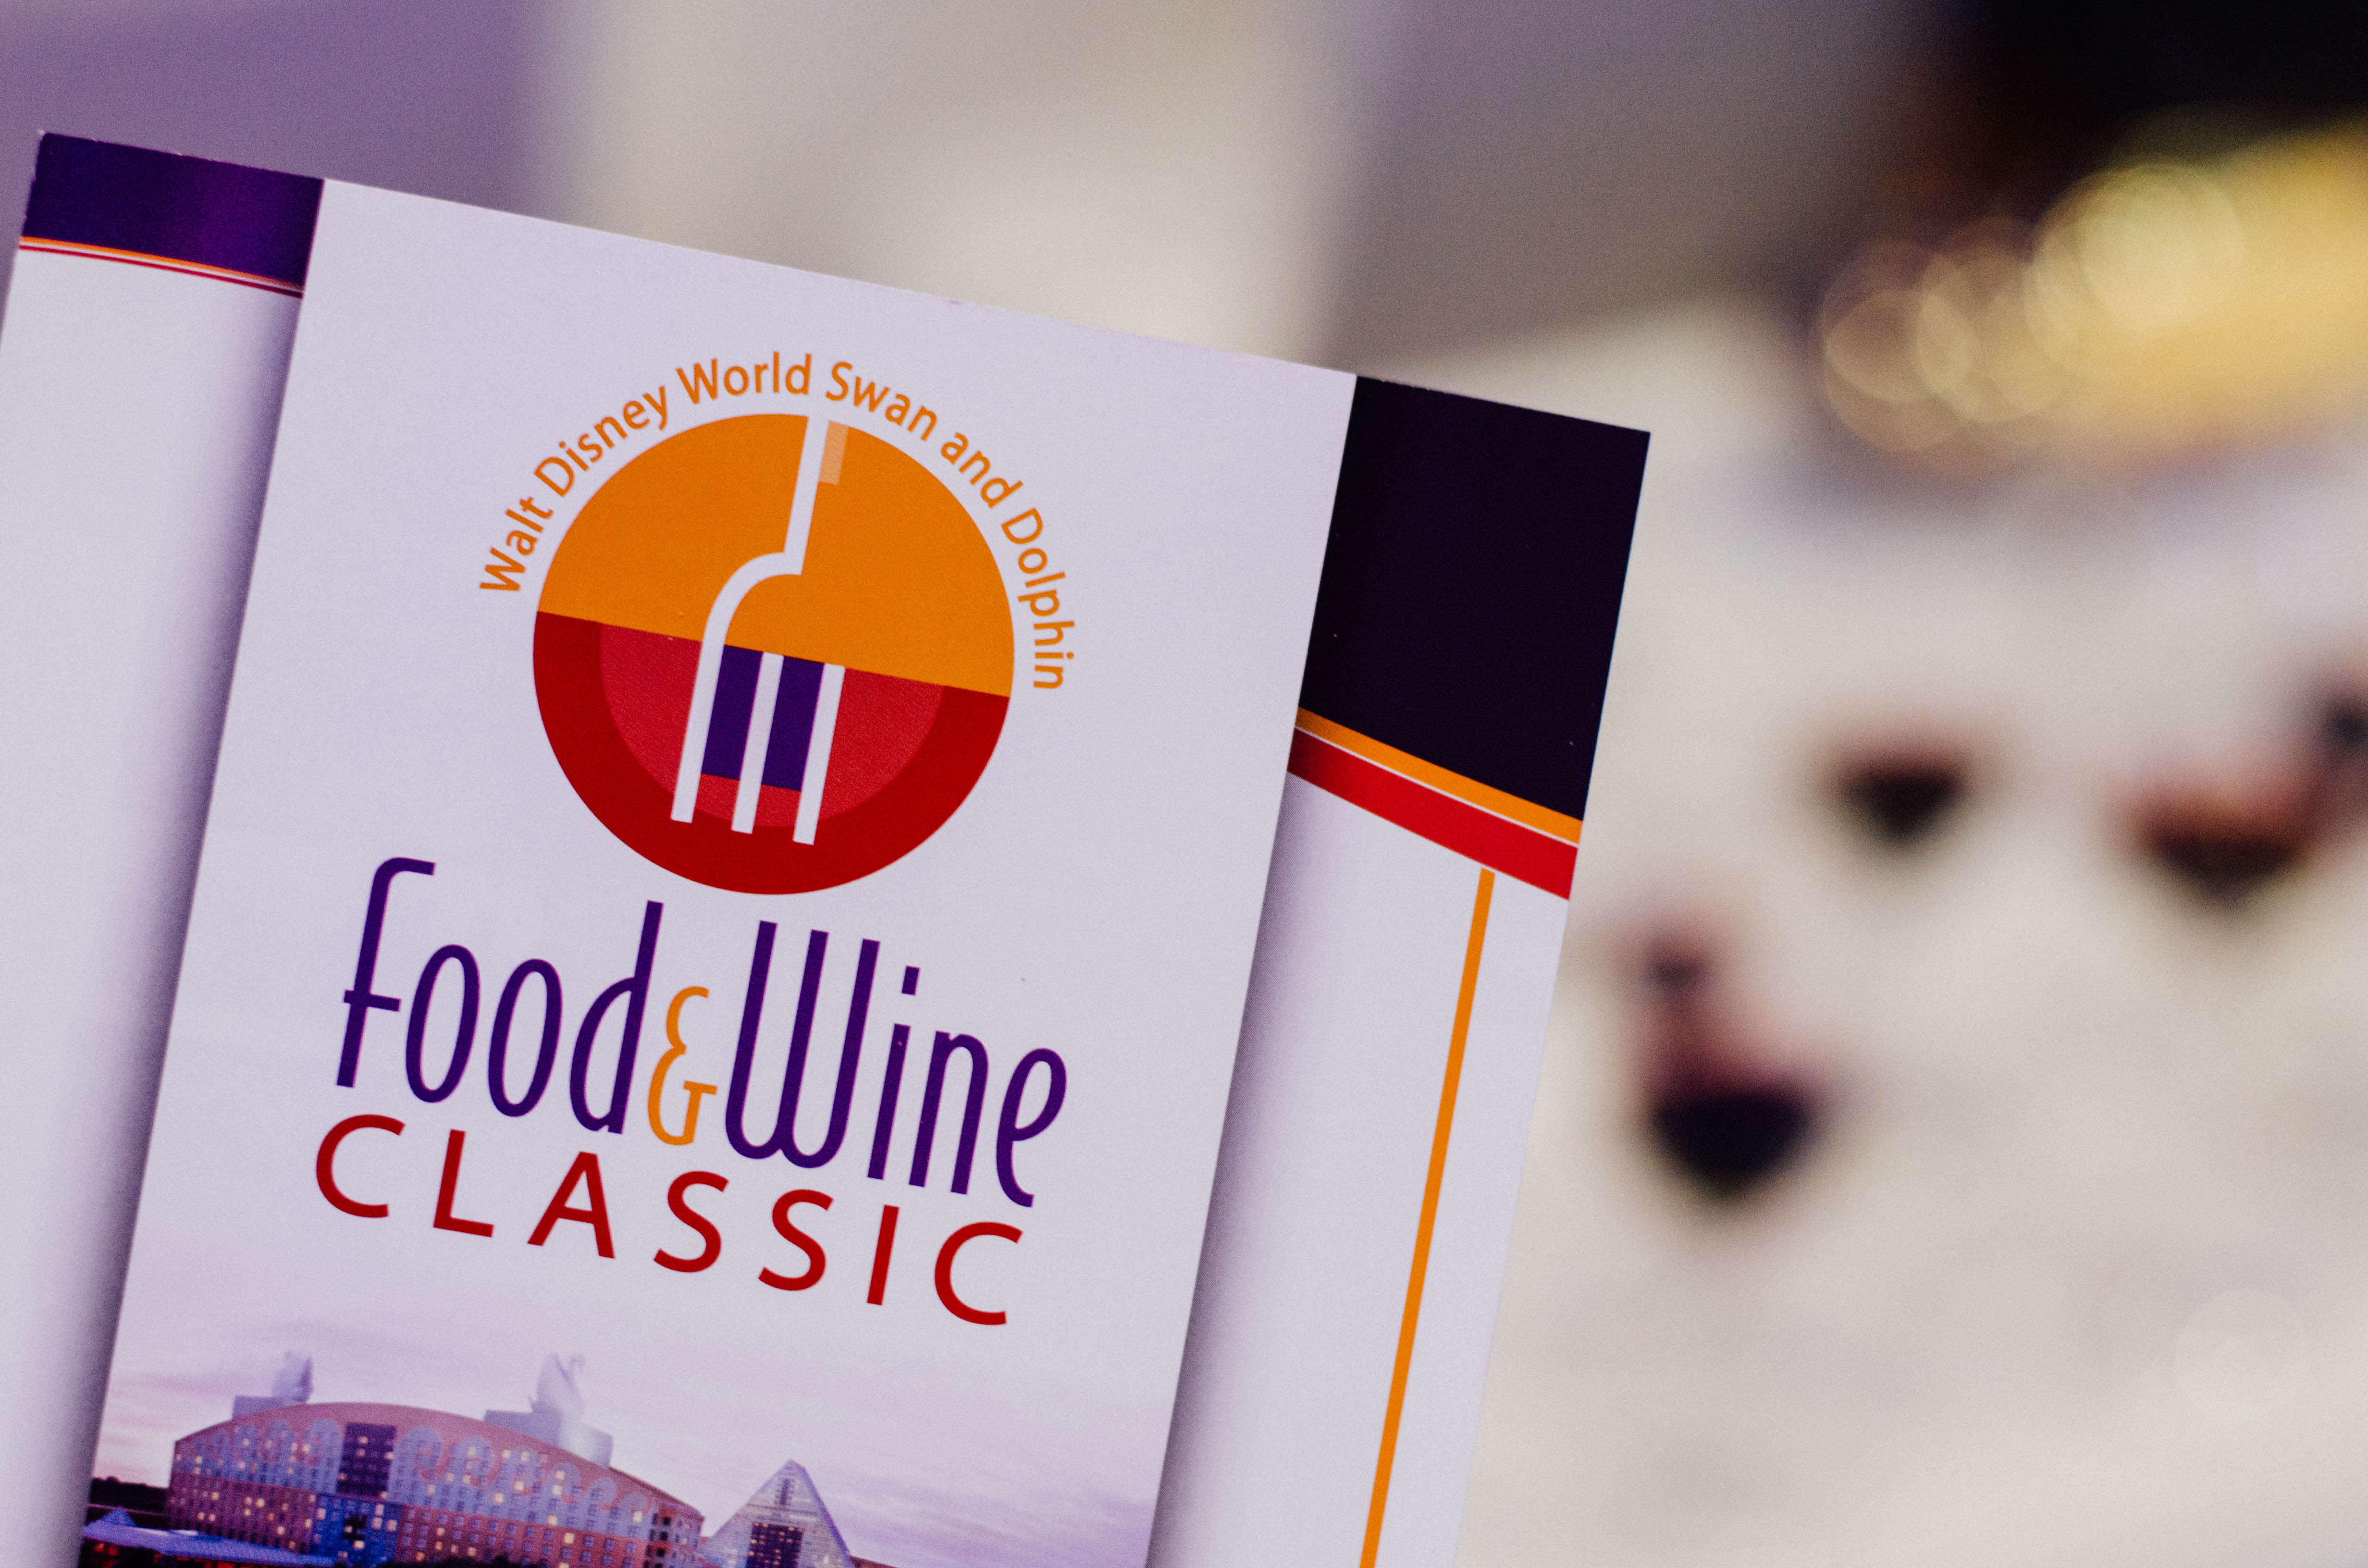 Walt Disney World Swan and Dolphin Food and Wine Classic 2015